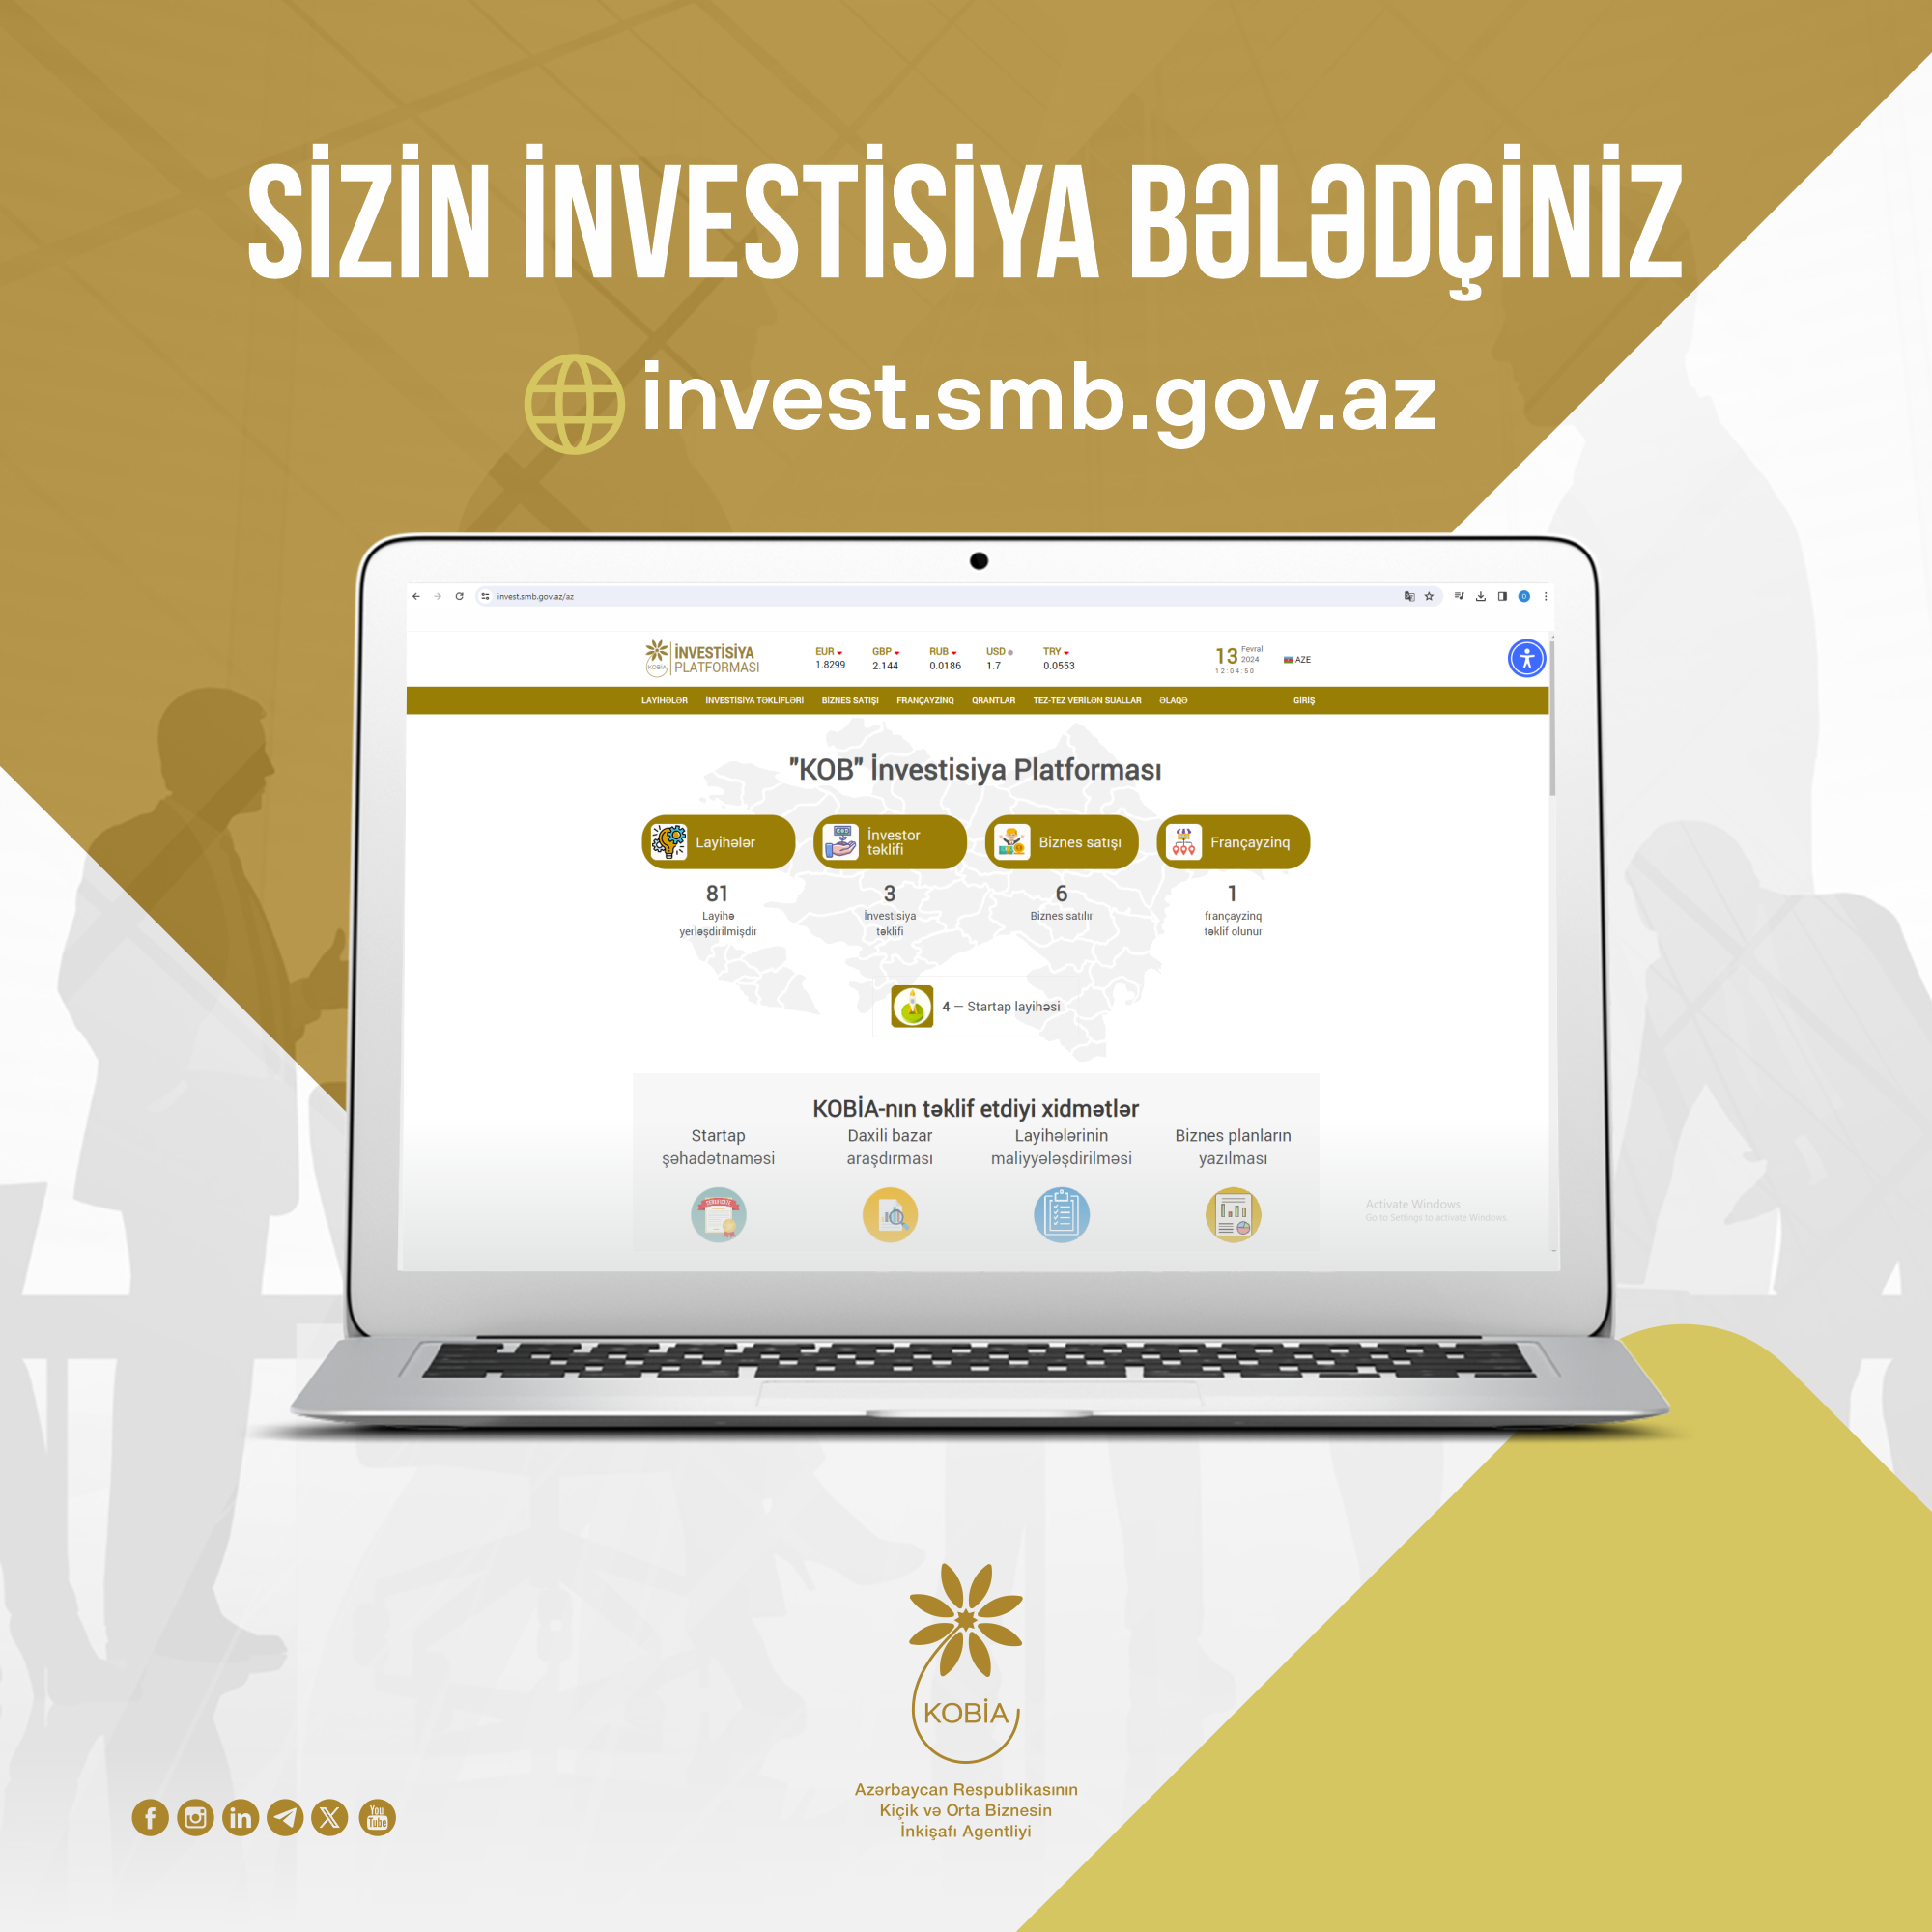 KOBİA encourages investors to invest in projects led by small and SMBs and startups